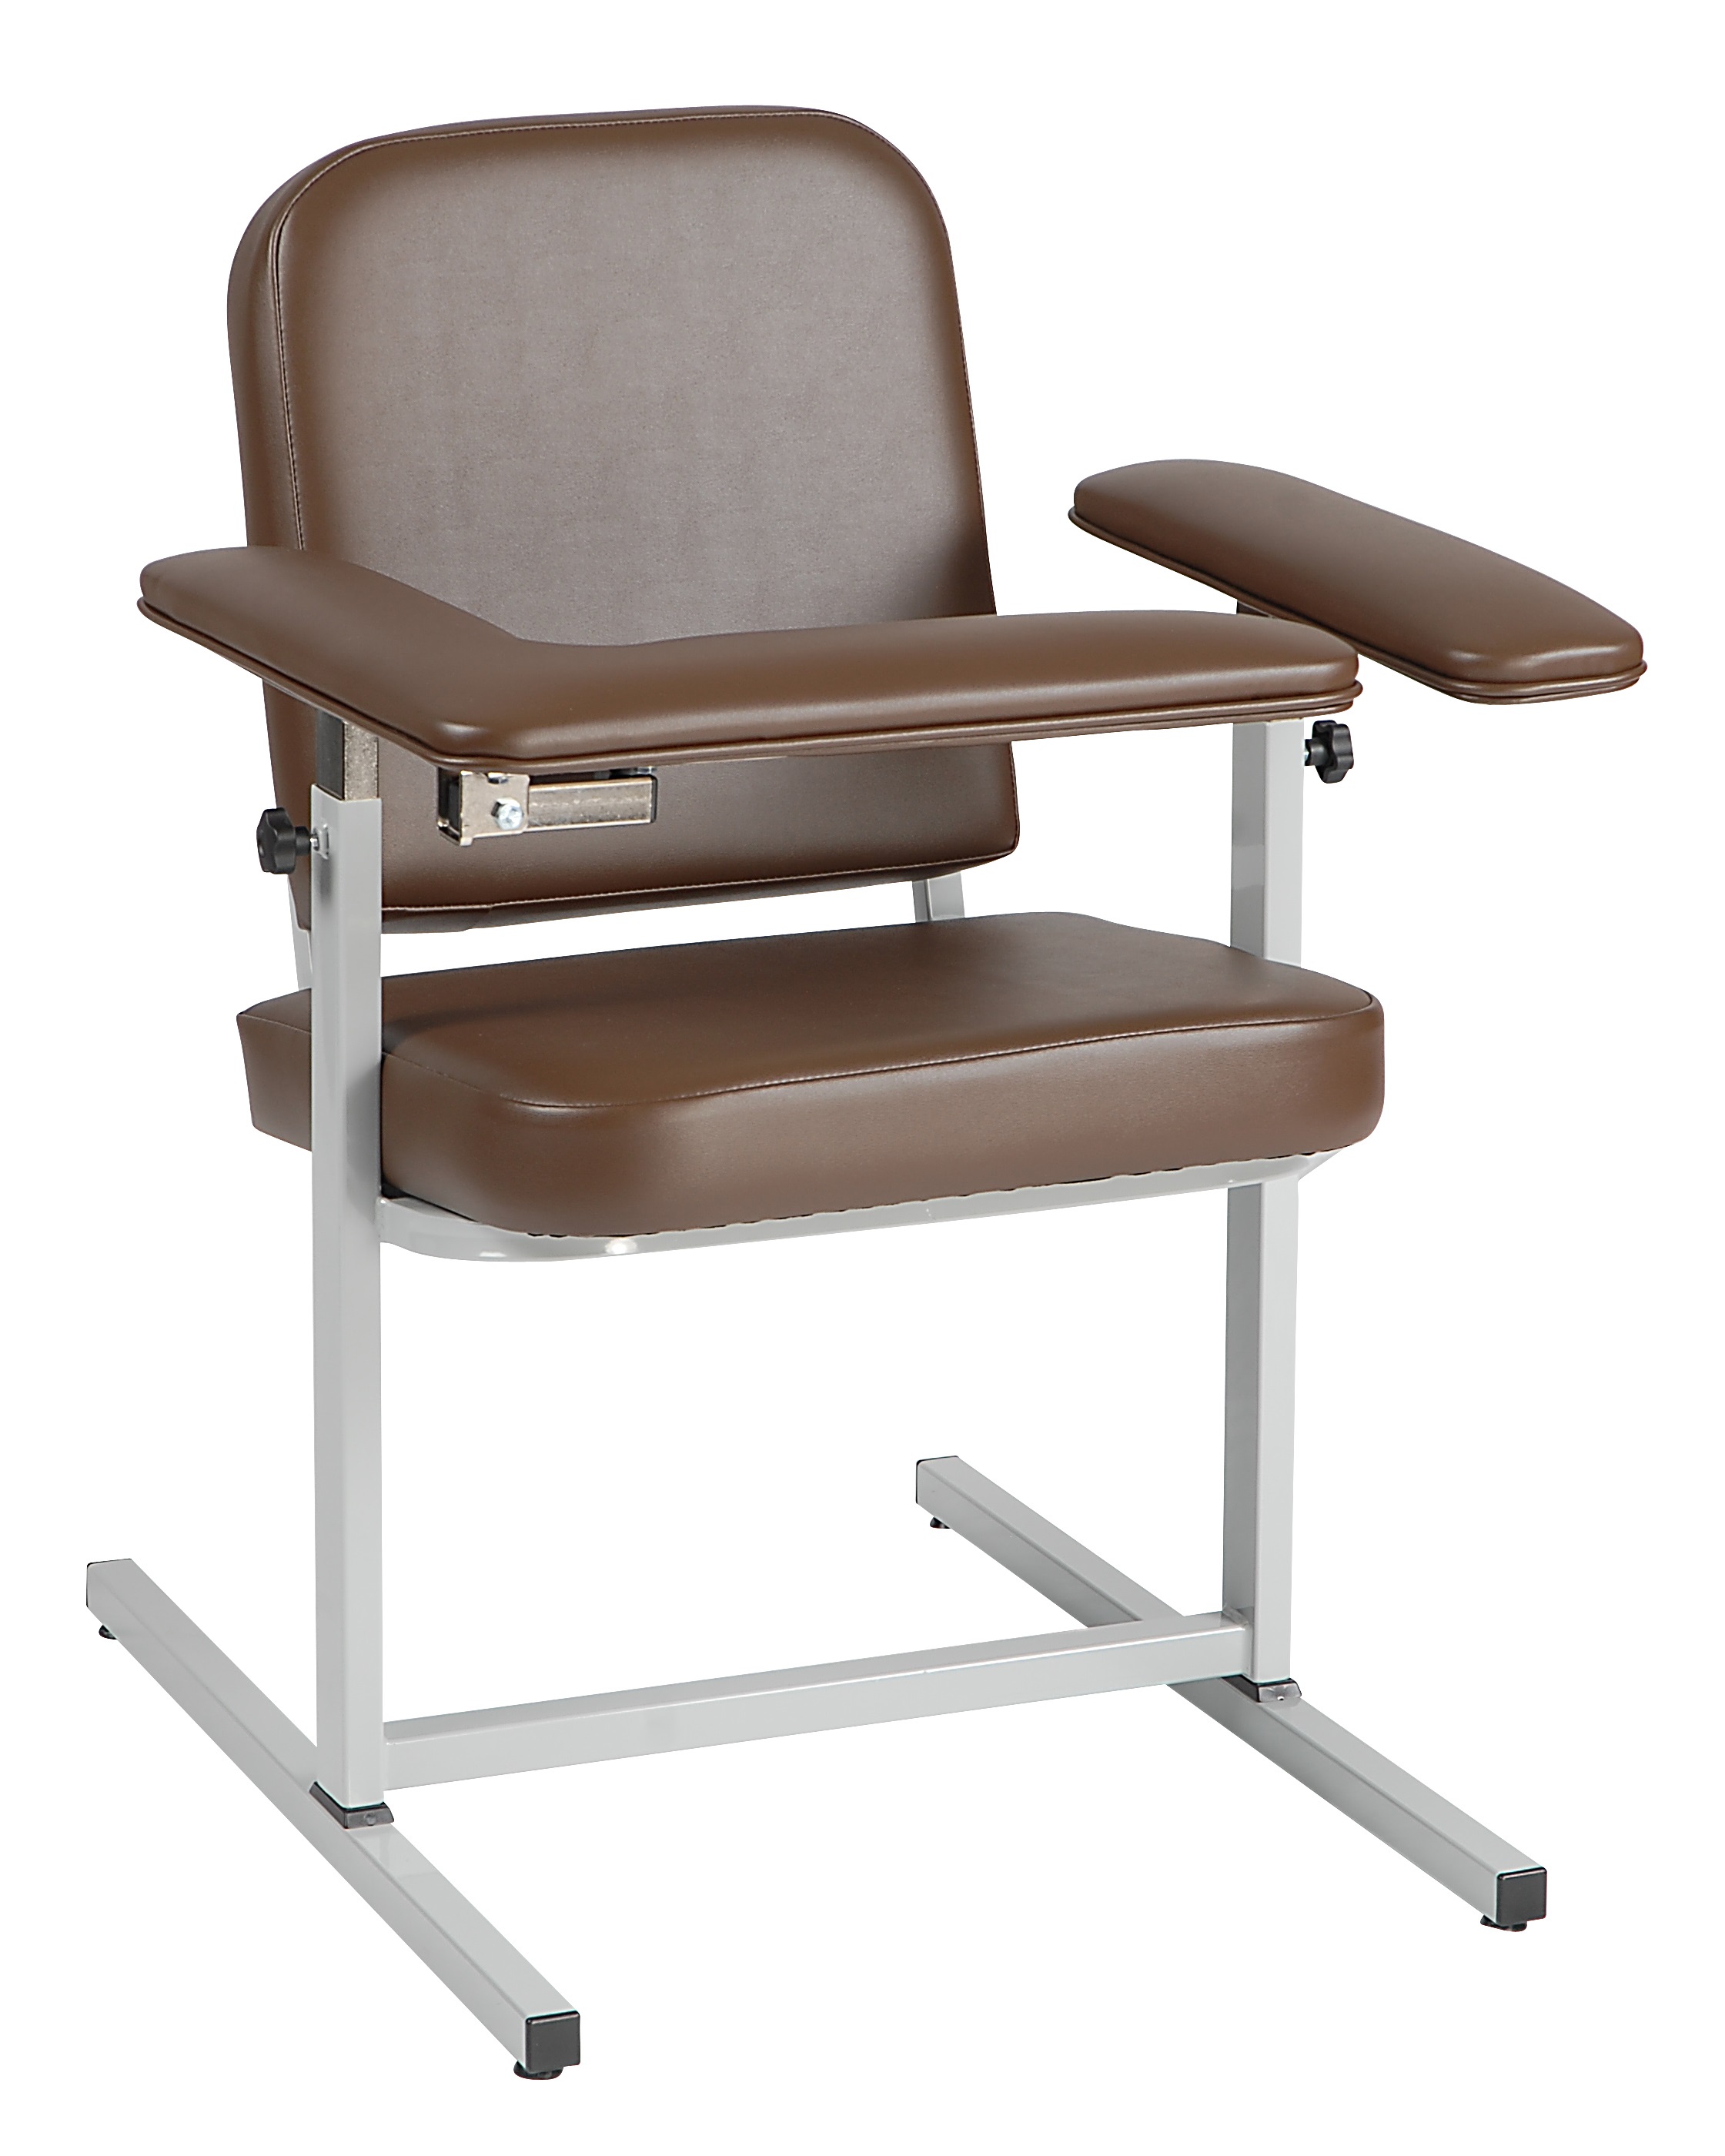 Fully Upholstered Narrow Standard Height Space Saving Blood Draw Chair